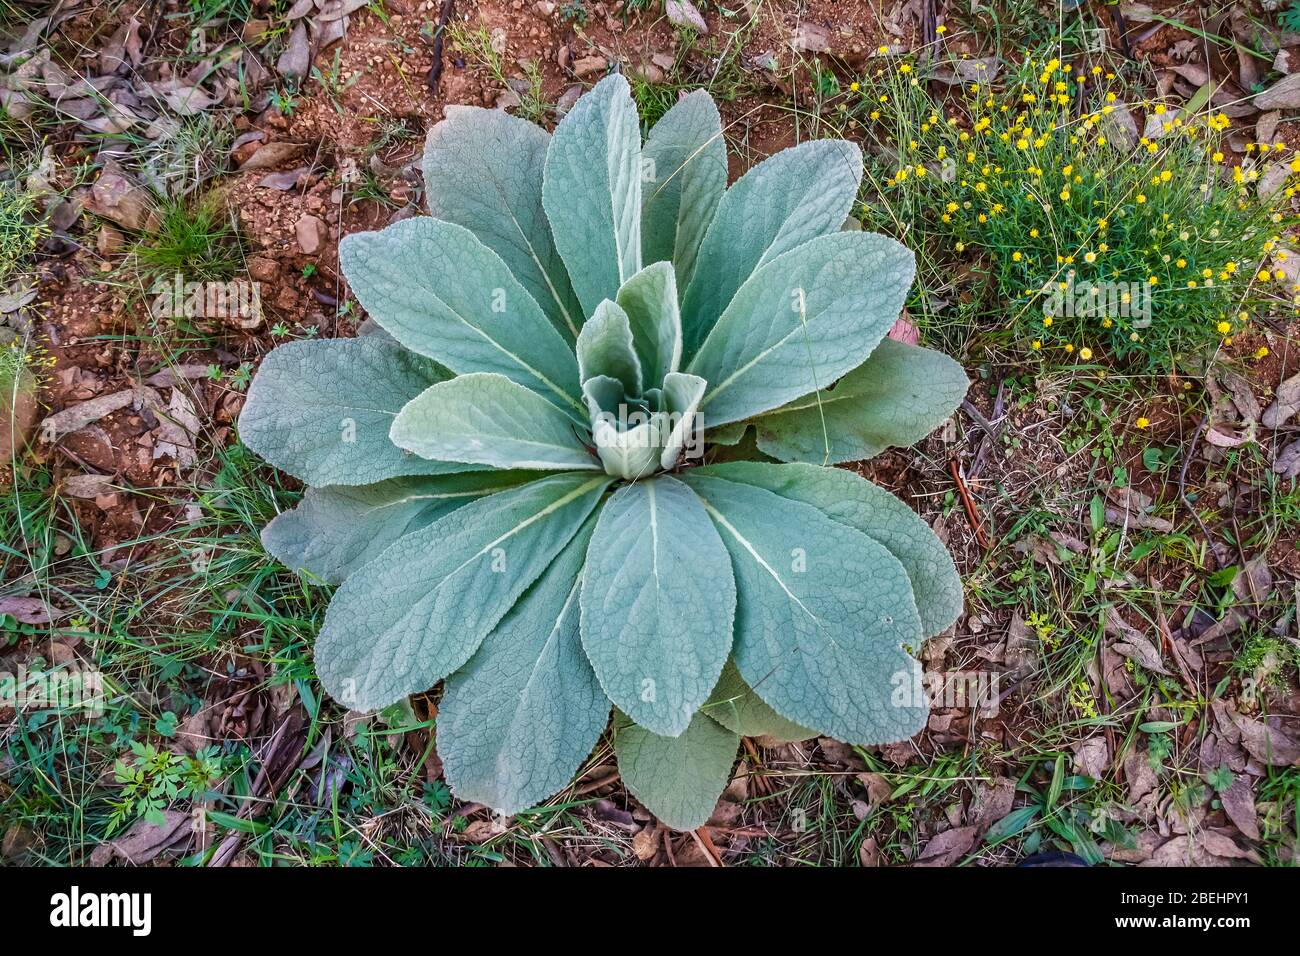 Verbascum thapsus, the common mullein, is a species of mullein native to Europe, northern Africa, and Asia. Stock Photo